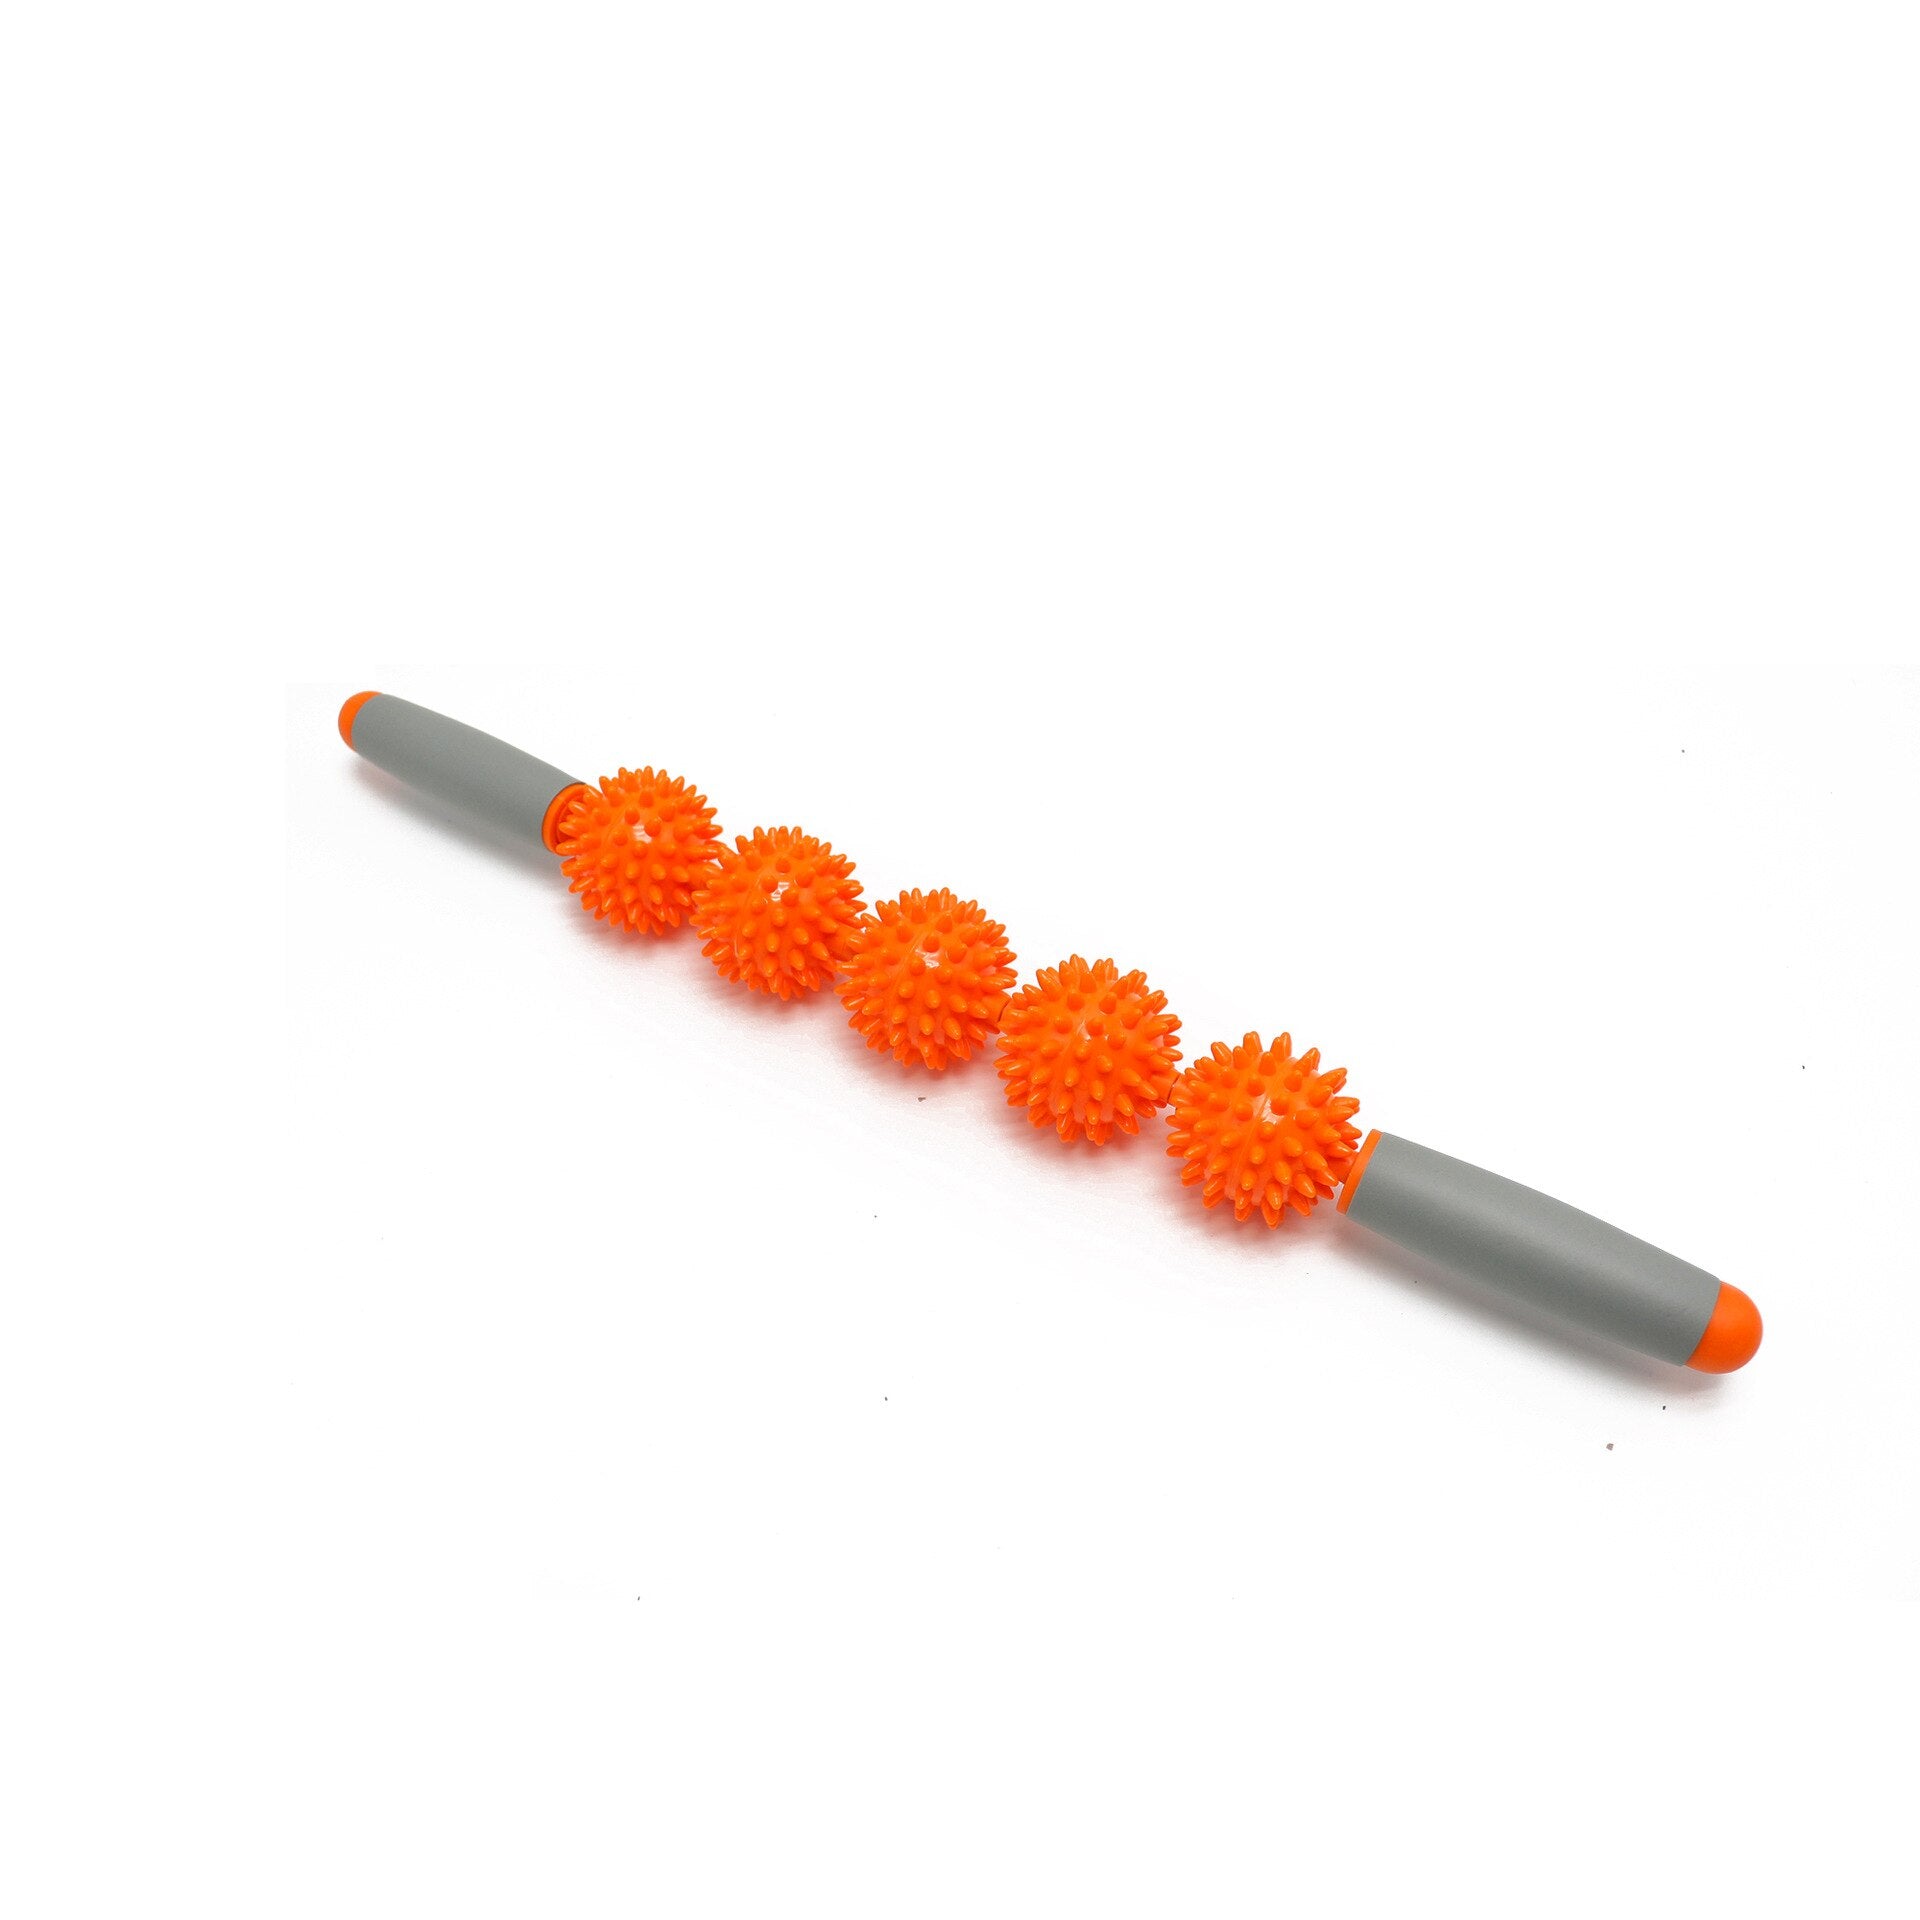 Color: Five rounds orange - Anti Cellulite Massager Stick Anti-Cellulite Trigger Point Stick Body Foot Face Leg Slimming Massage Muscle Roller